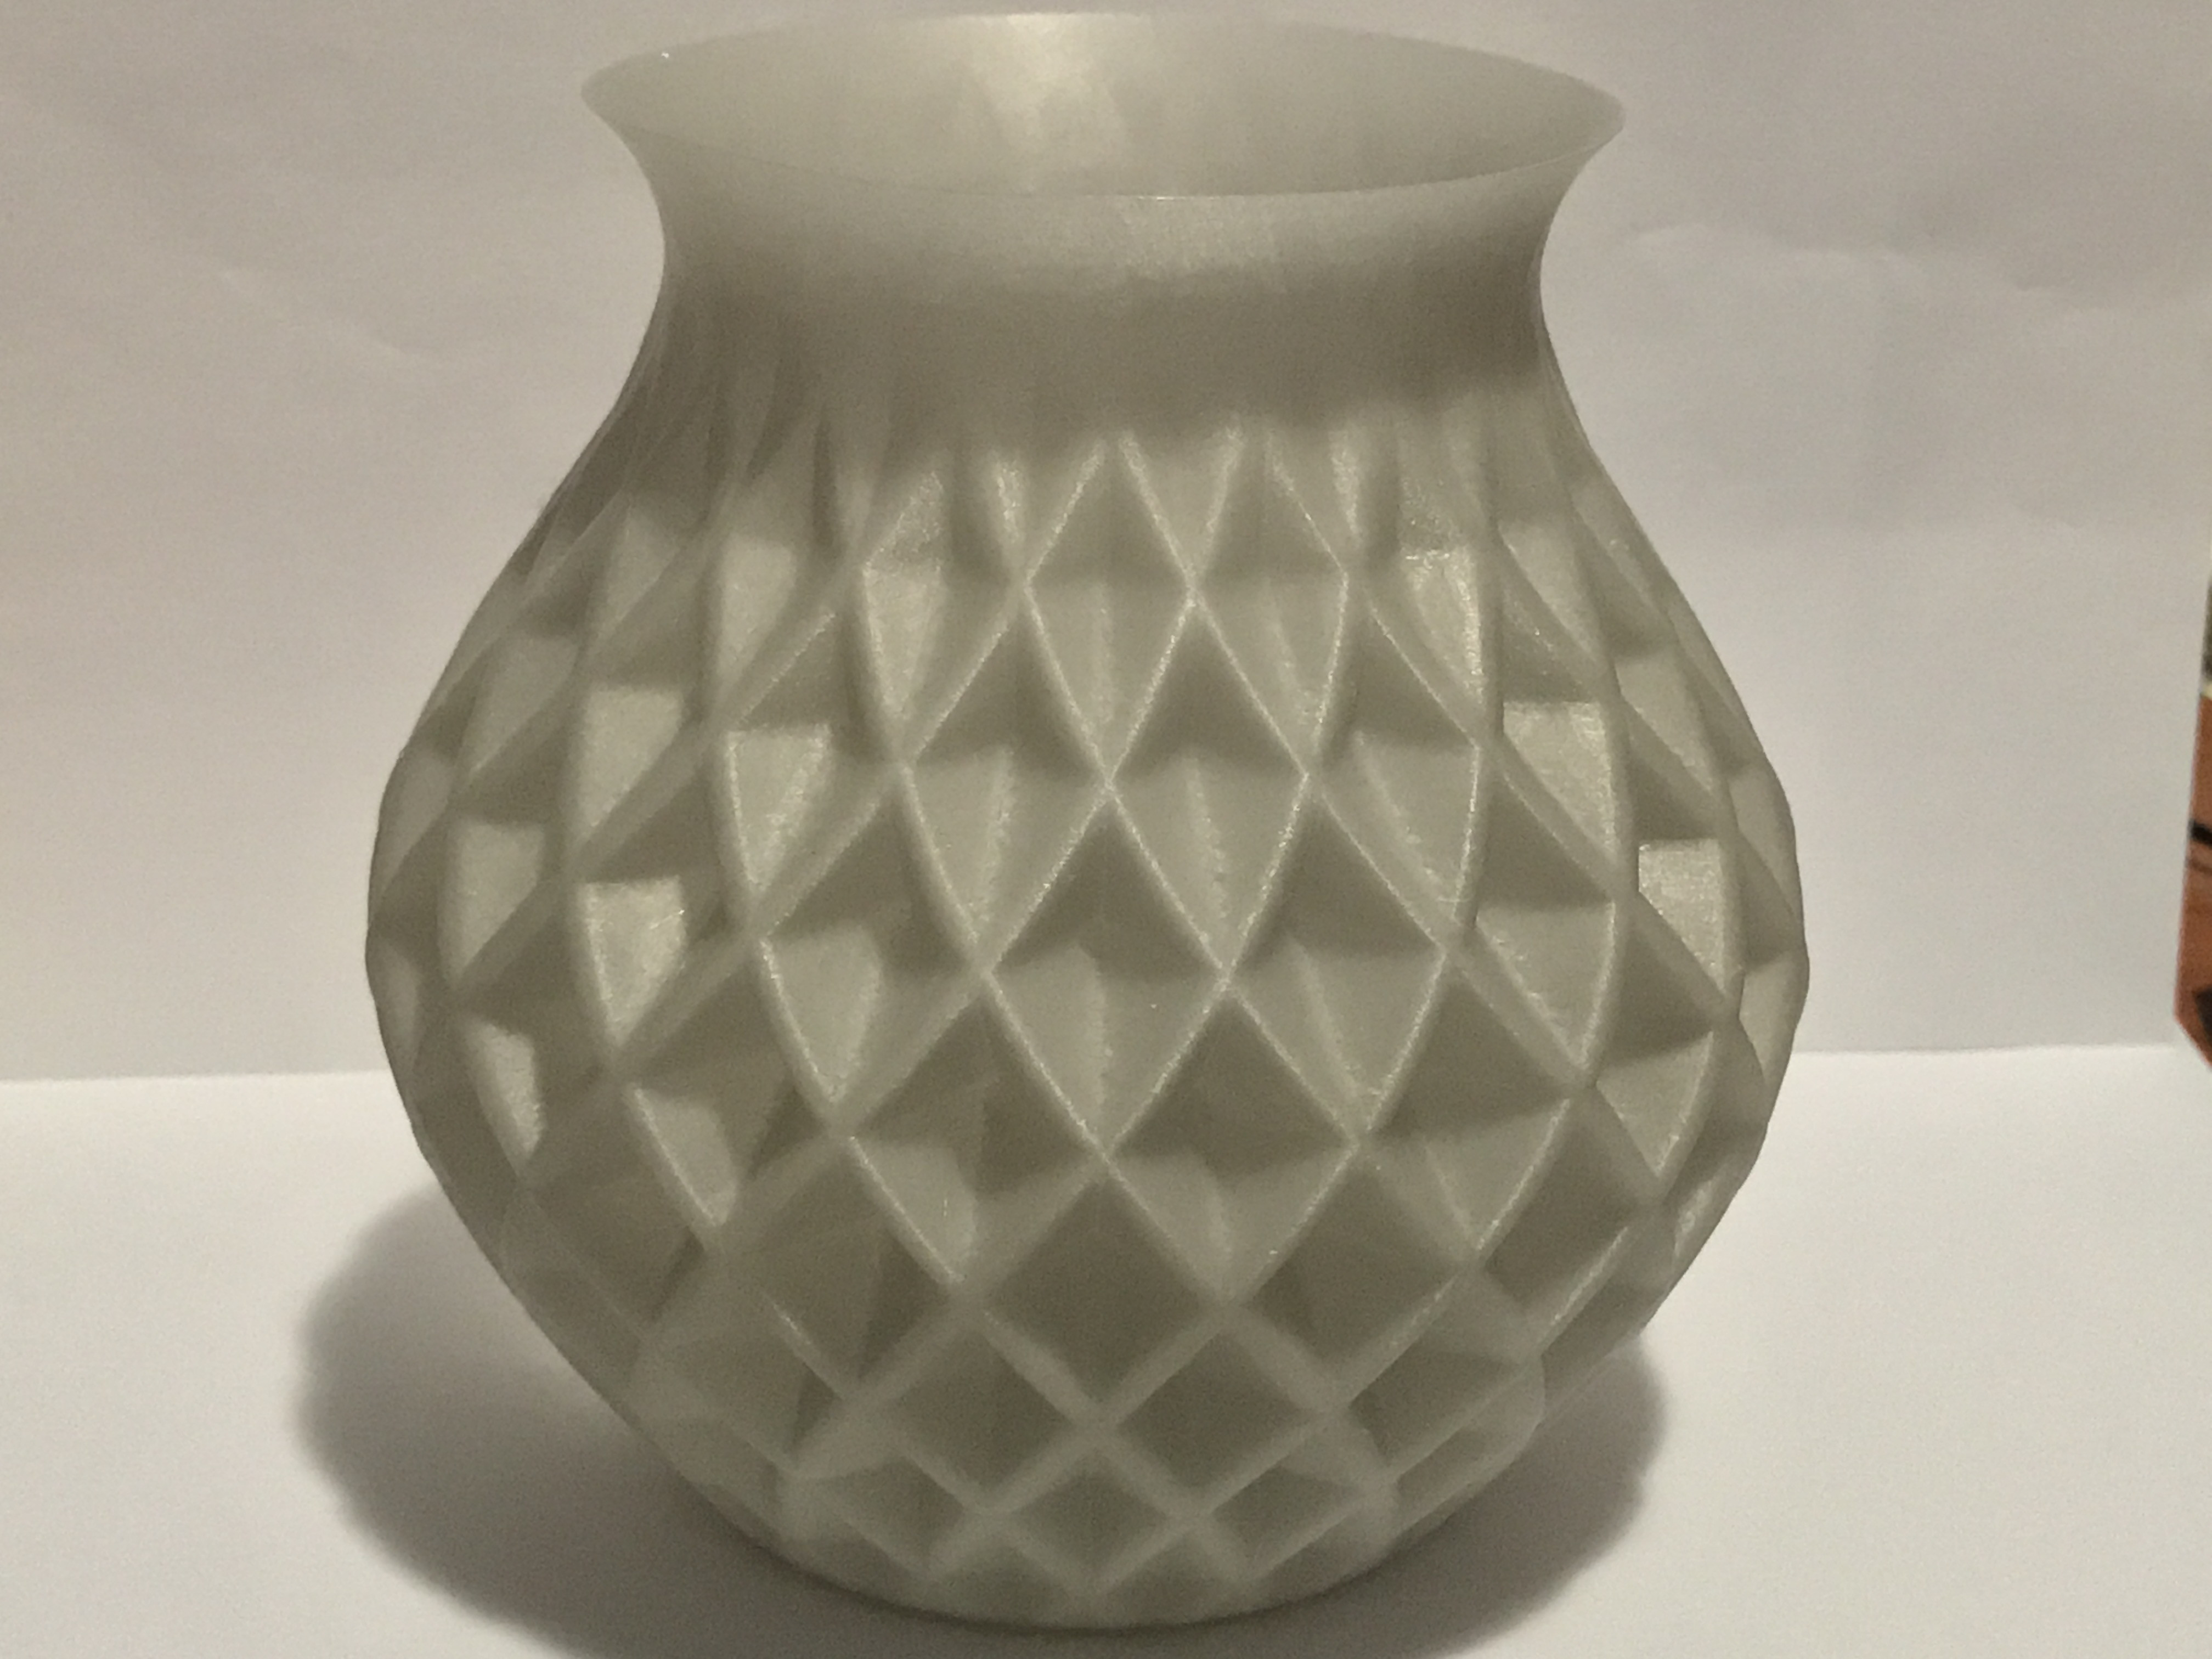 23 Recommended 3d Printed Vase 2024 free download 3d printed vase of about fmg3d treatstock inside jpg img 957